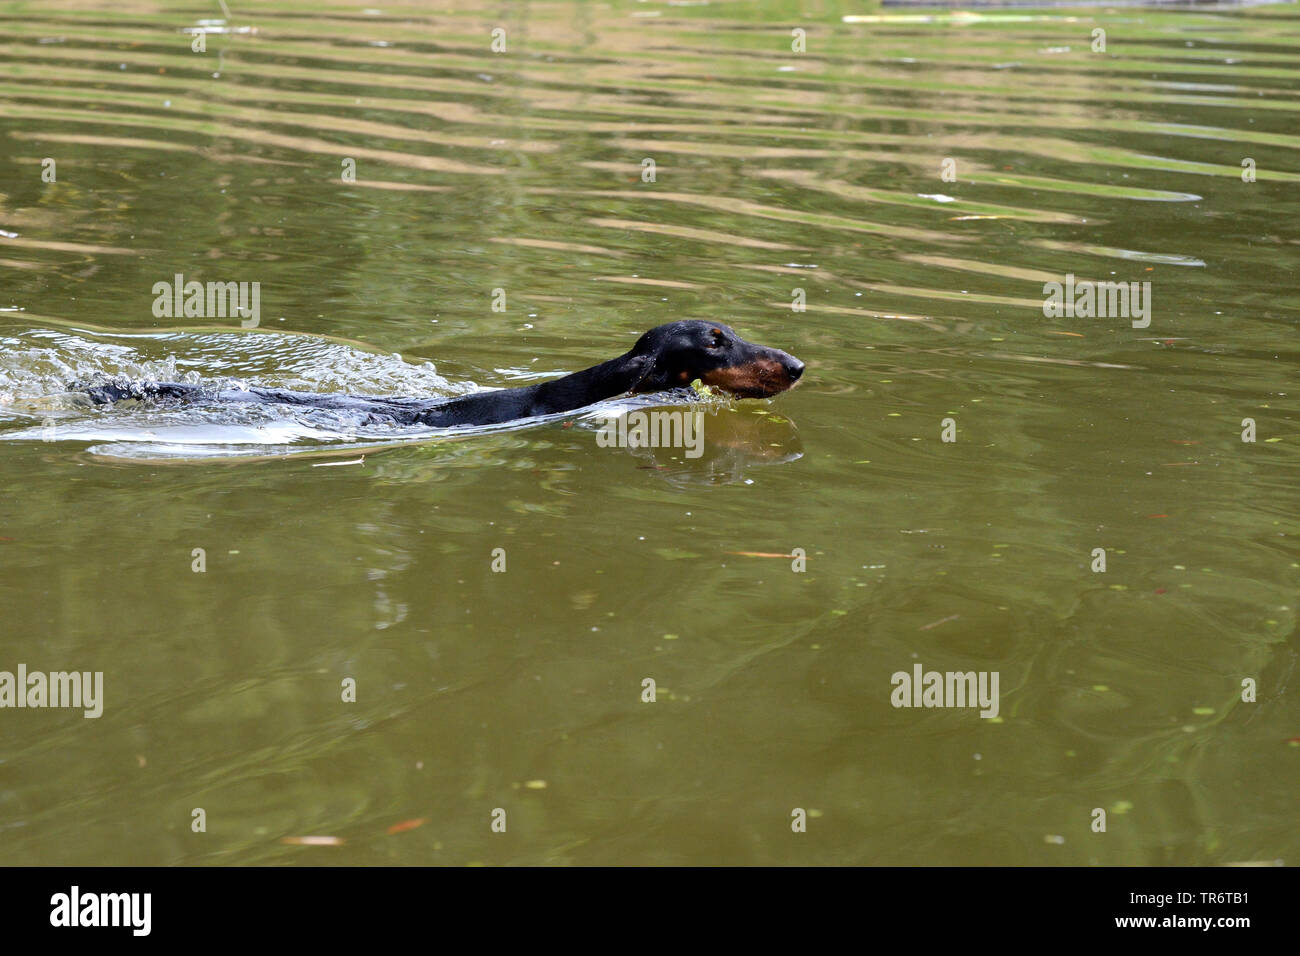 Short-haired Dachshund, Short-haired sausage dog, domestic dog (Canis lupus f. familiaris), swimming in a lake, Germany Stock Photo